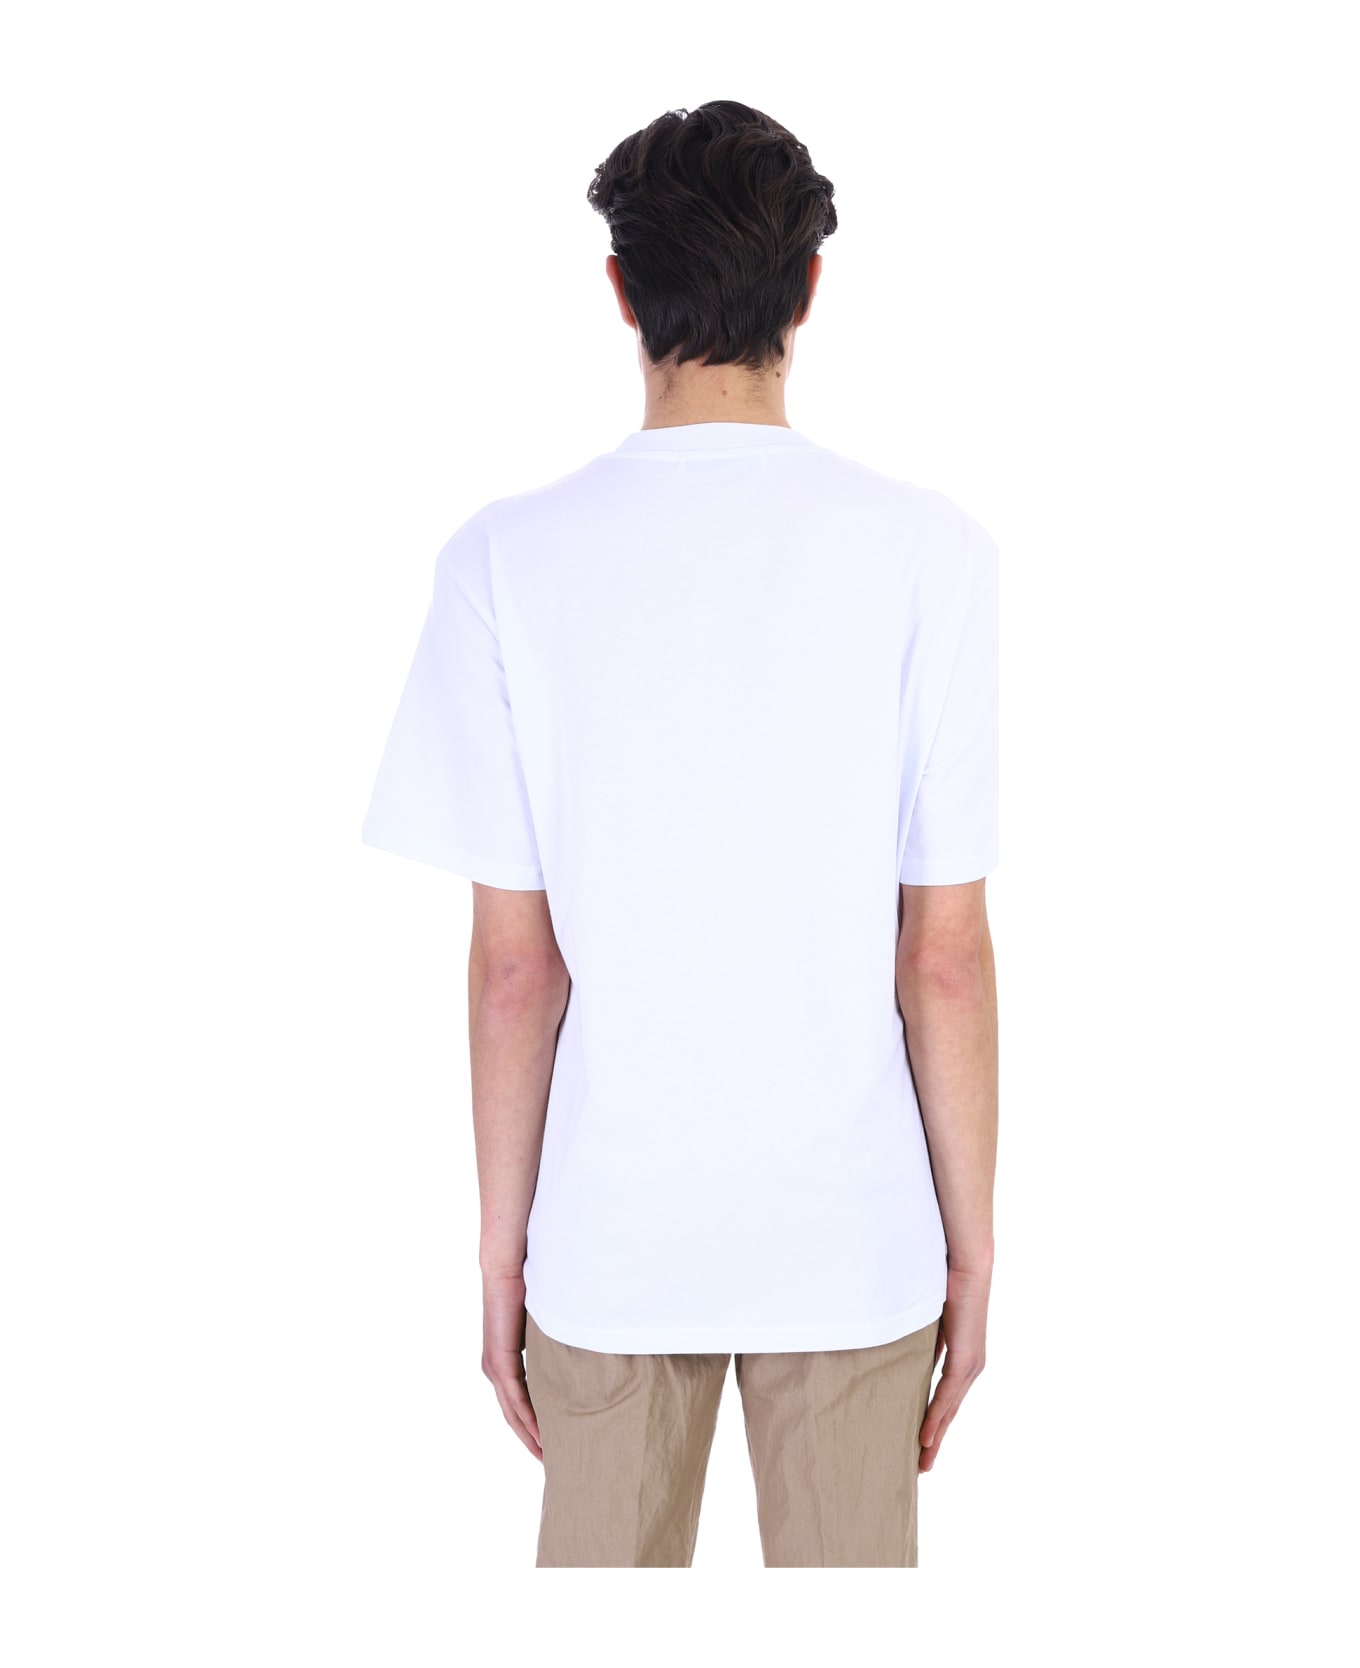 Department Five Titos T-shirt In White Cotton - white